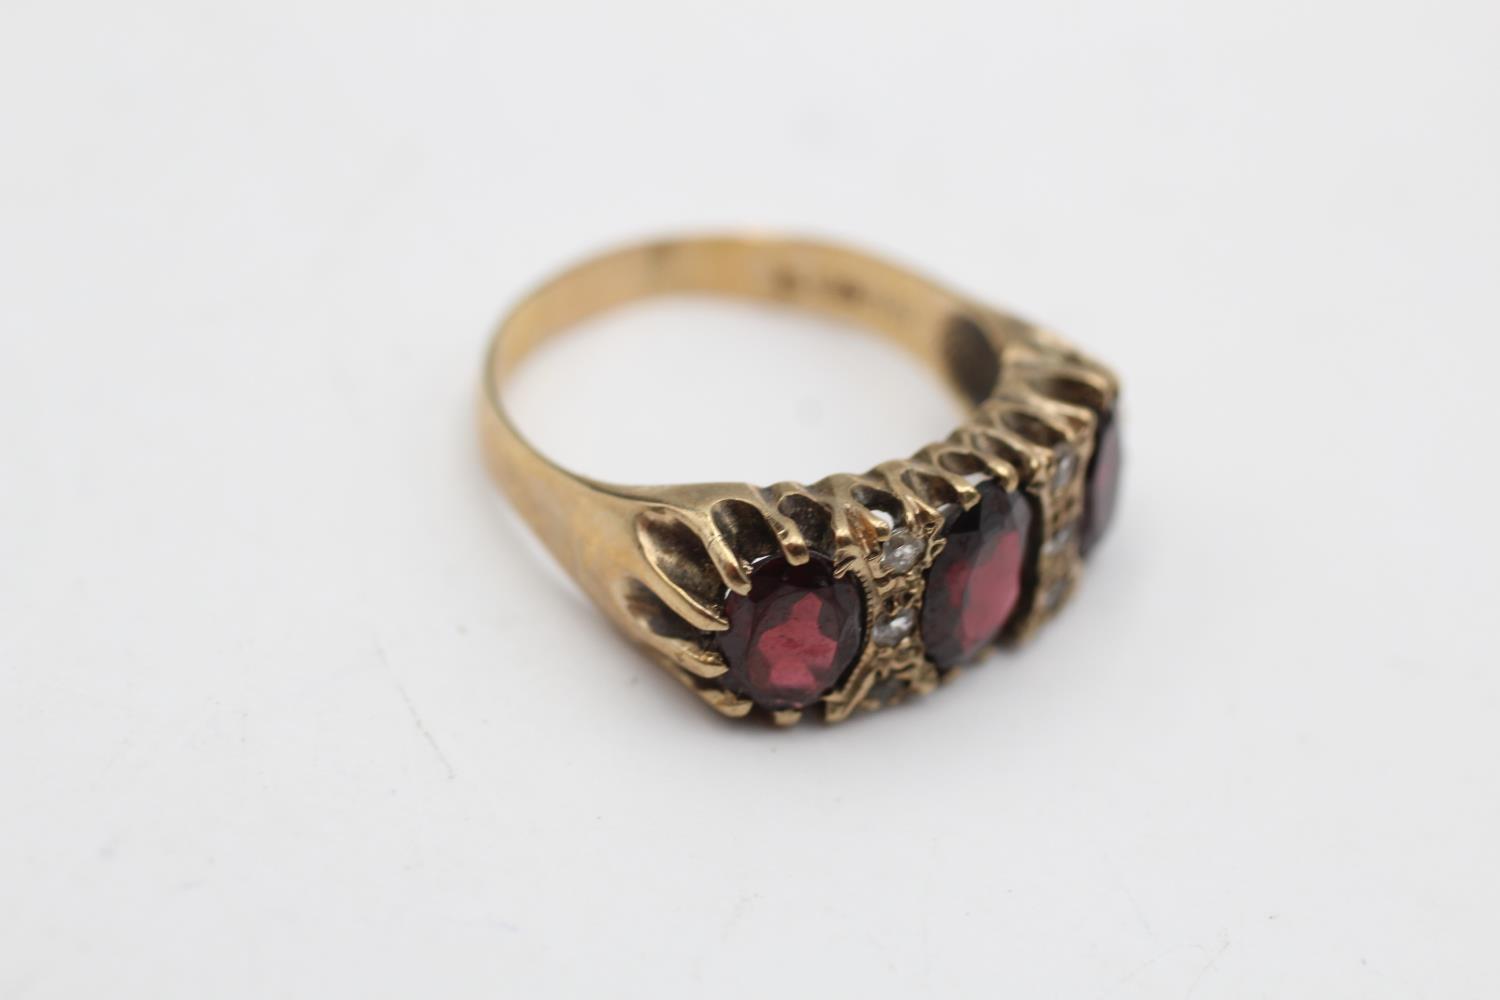 9ct gold vintage garnet & clear gemstone buttercup setting dress ring (4.6g) Size Q - Image 4 of 5